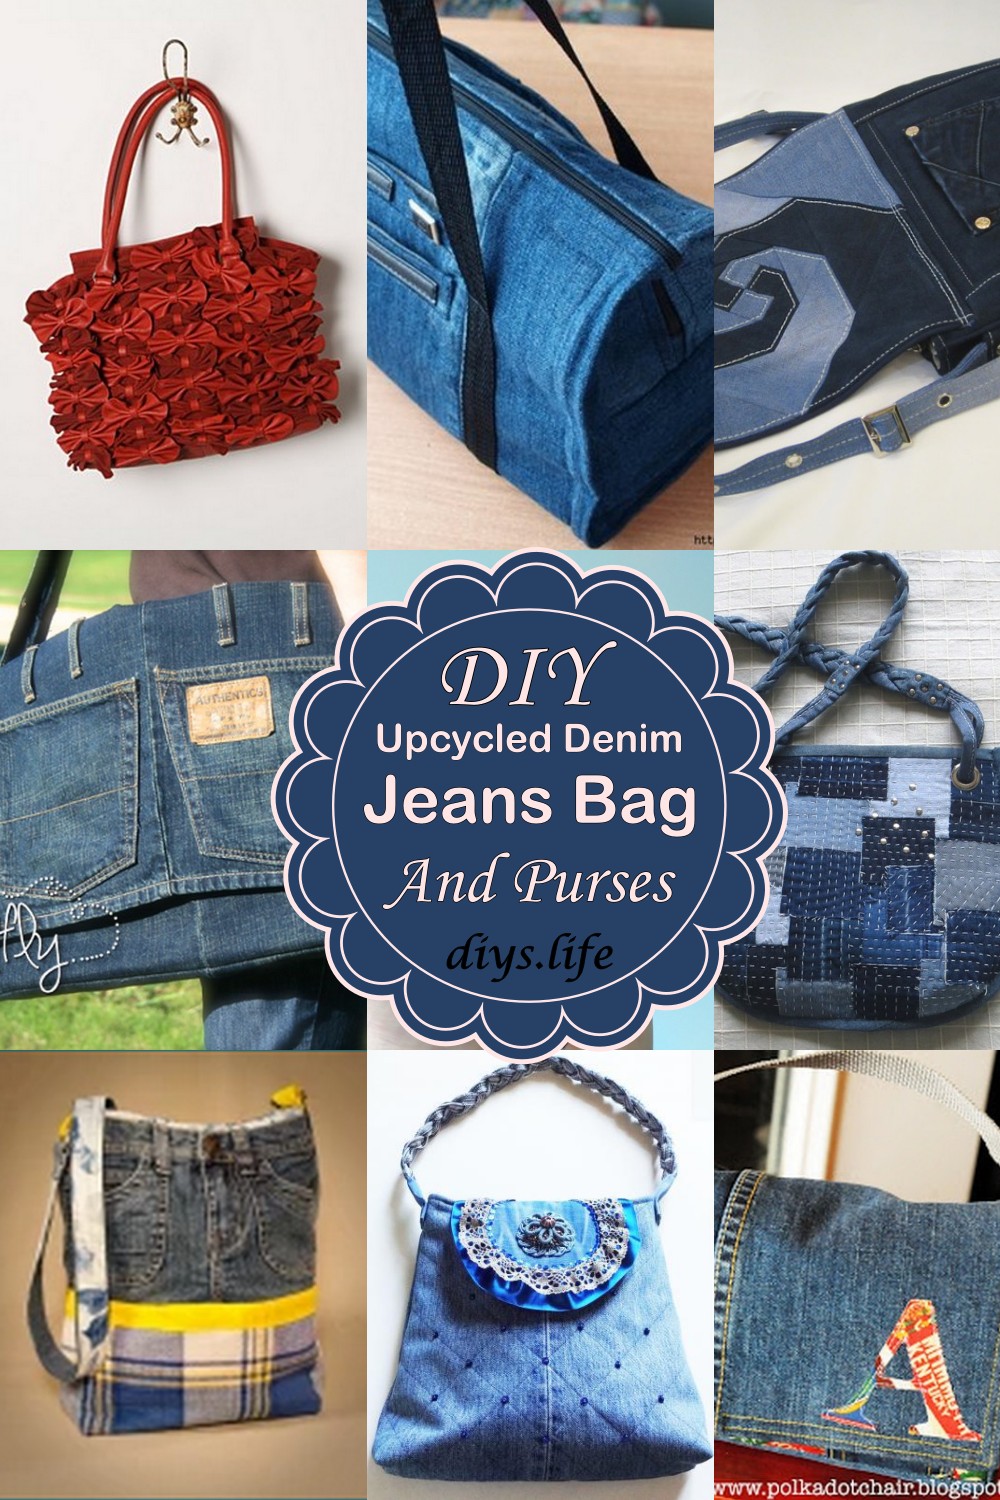 How to make a bag from Old jeans - YouTube | Bag from old jeans, Diy bags  jeans, Denim bag diy